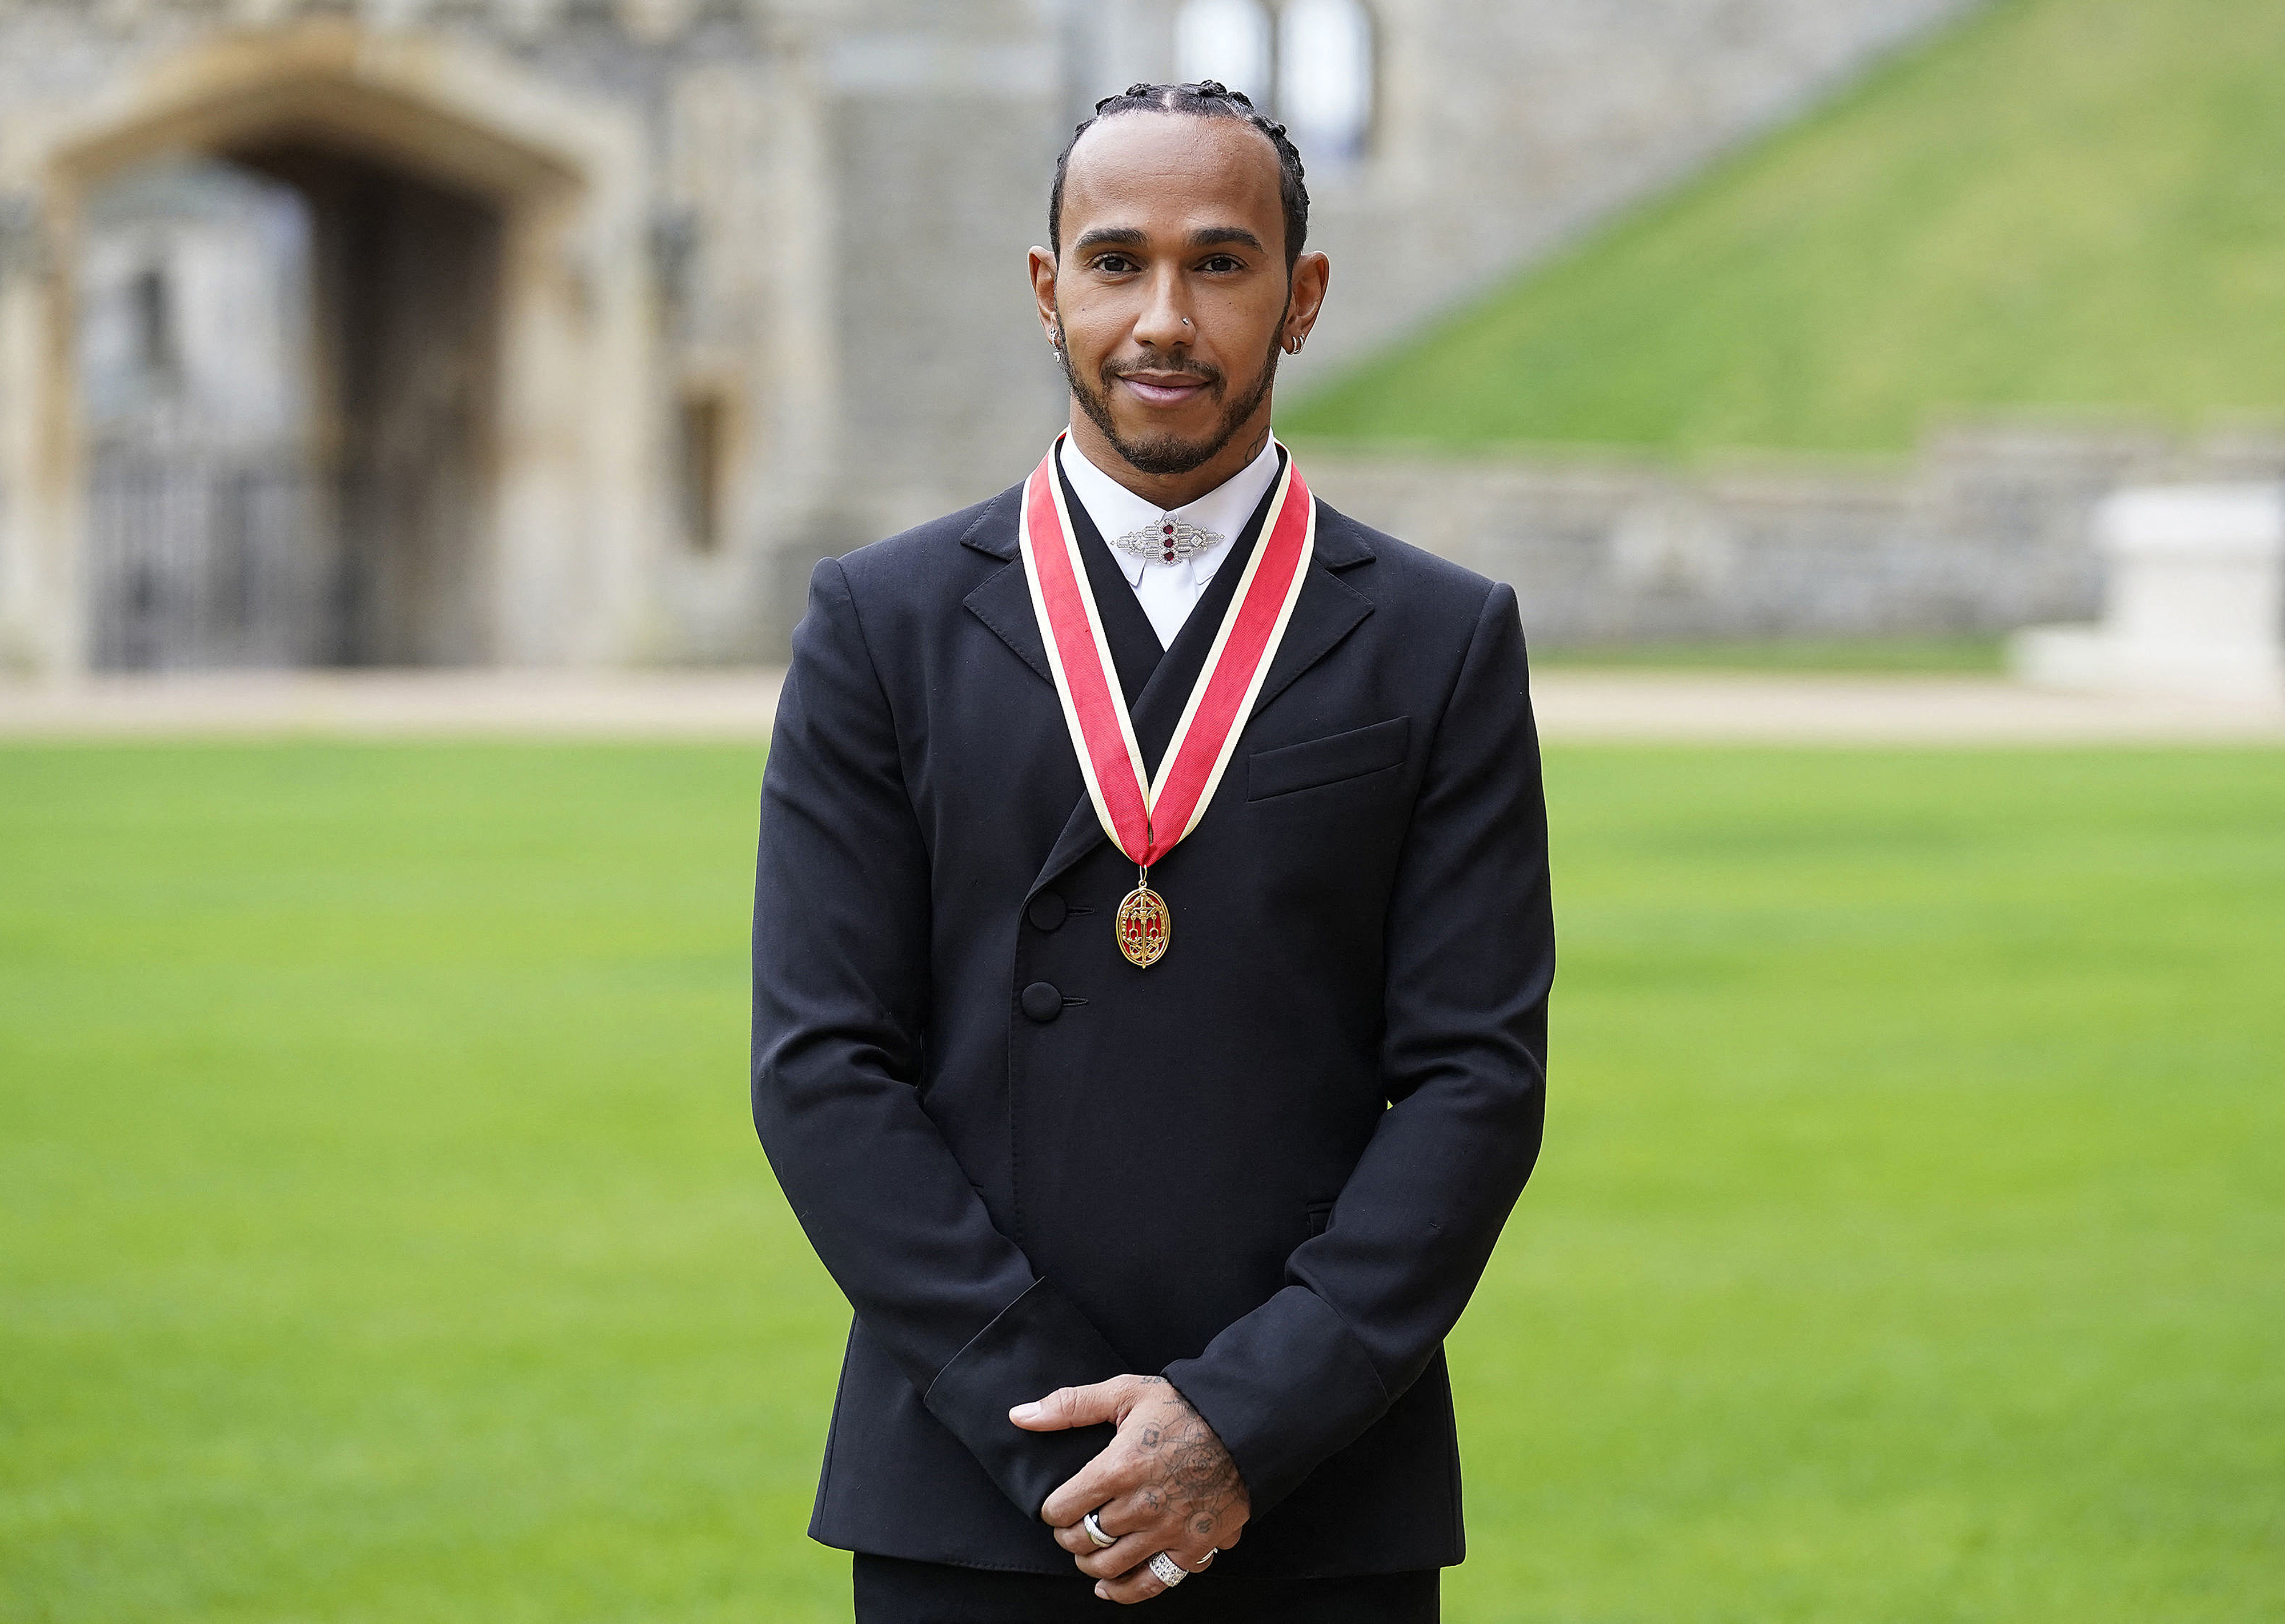 Lewis Hamilton wants more Black students in auto racing. Here’s how it’s happening.